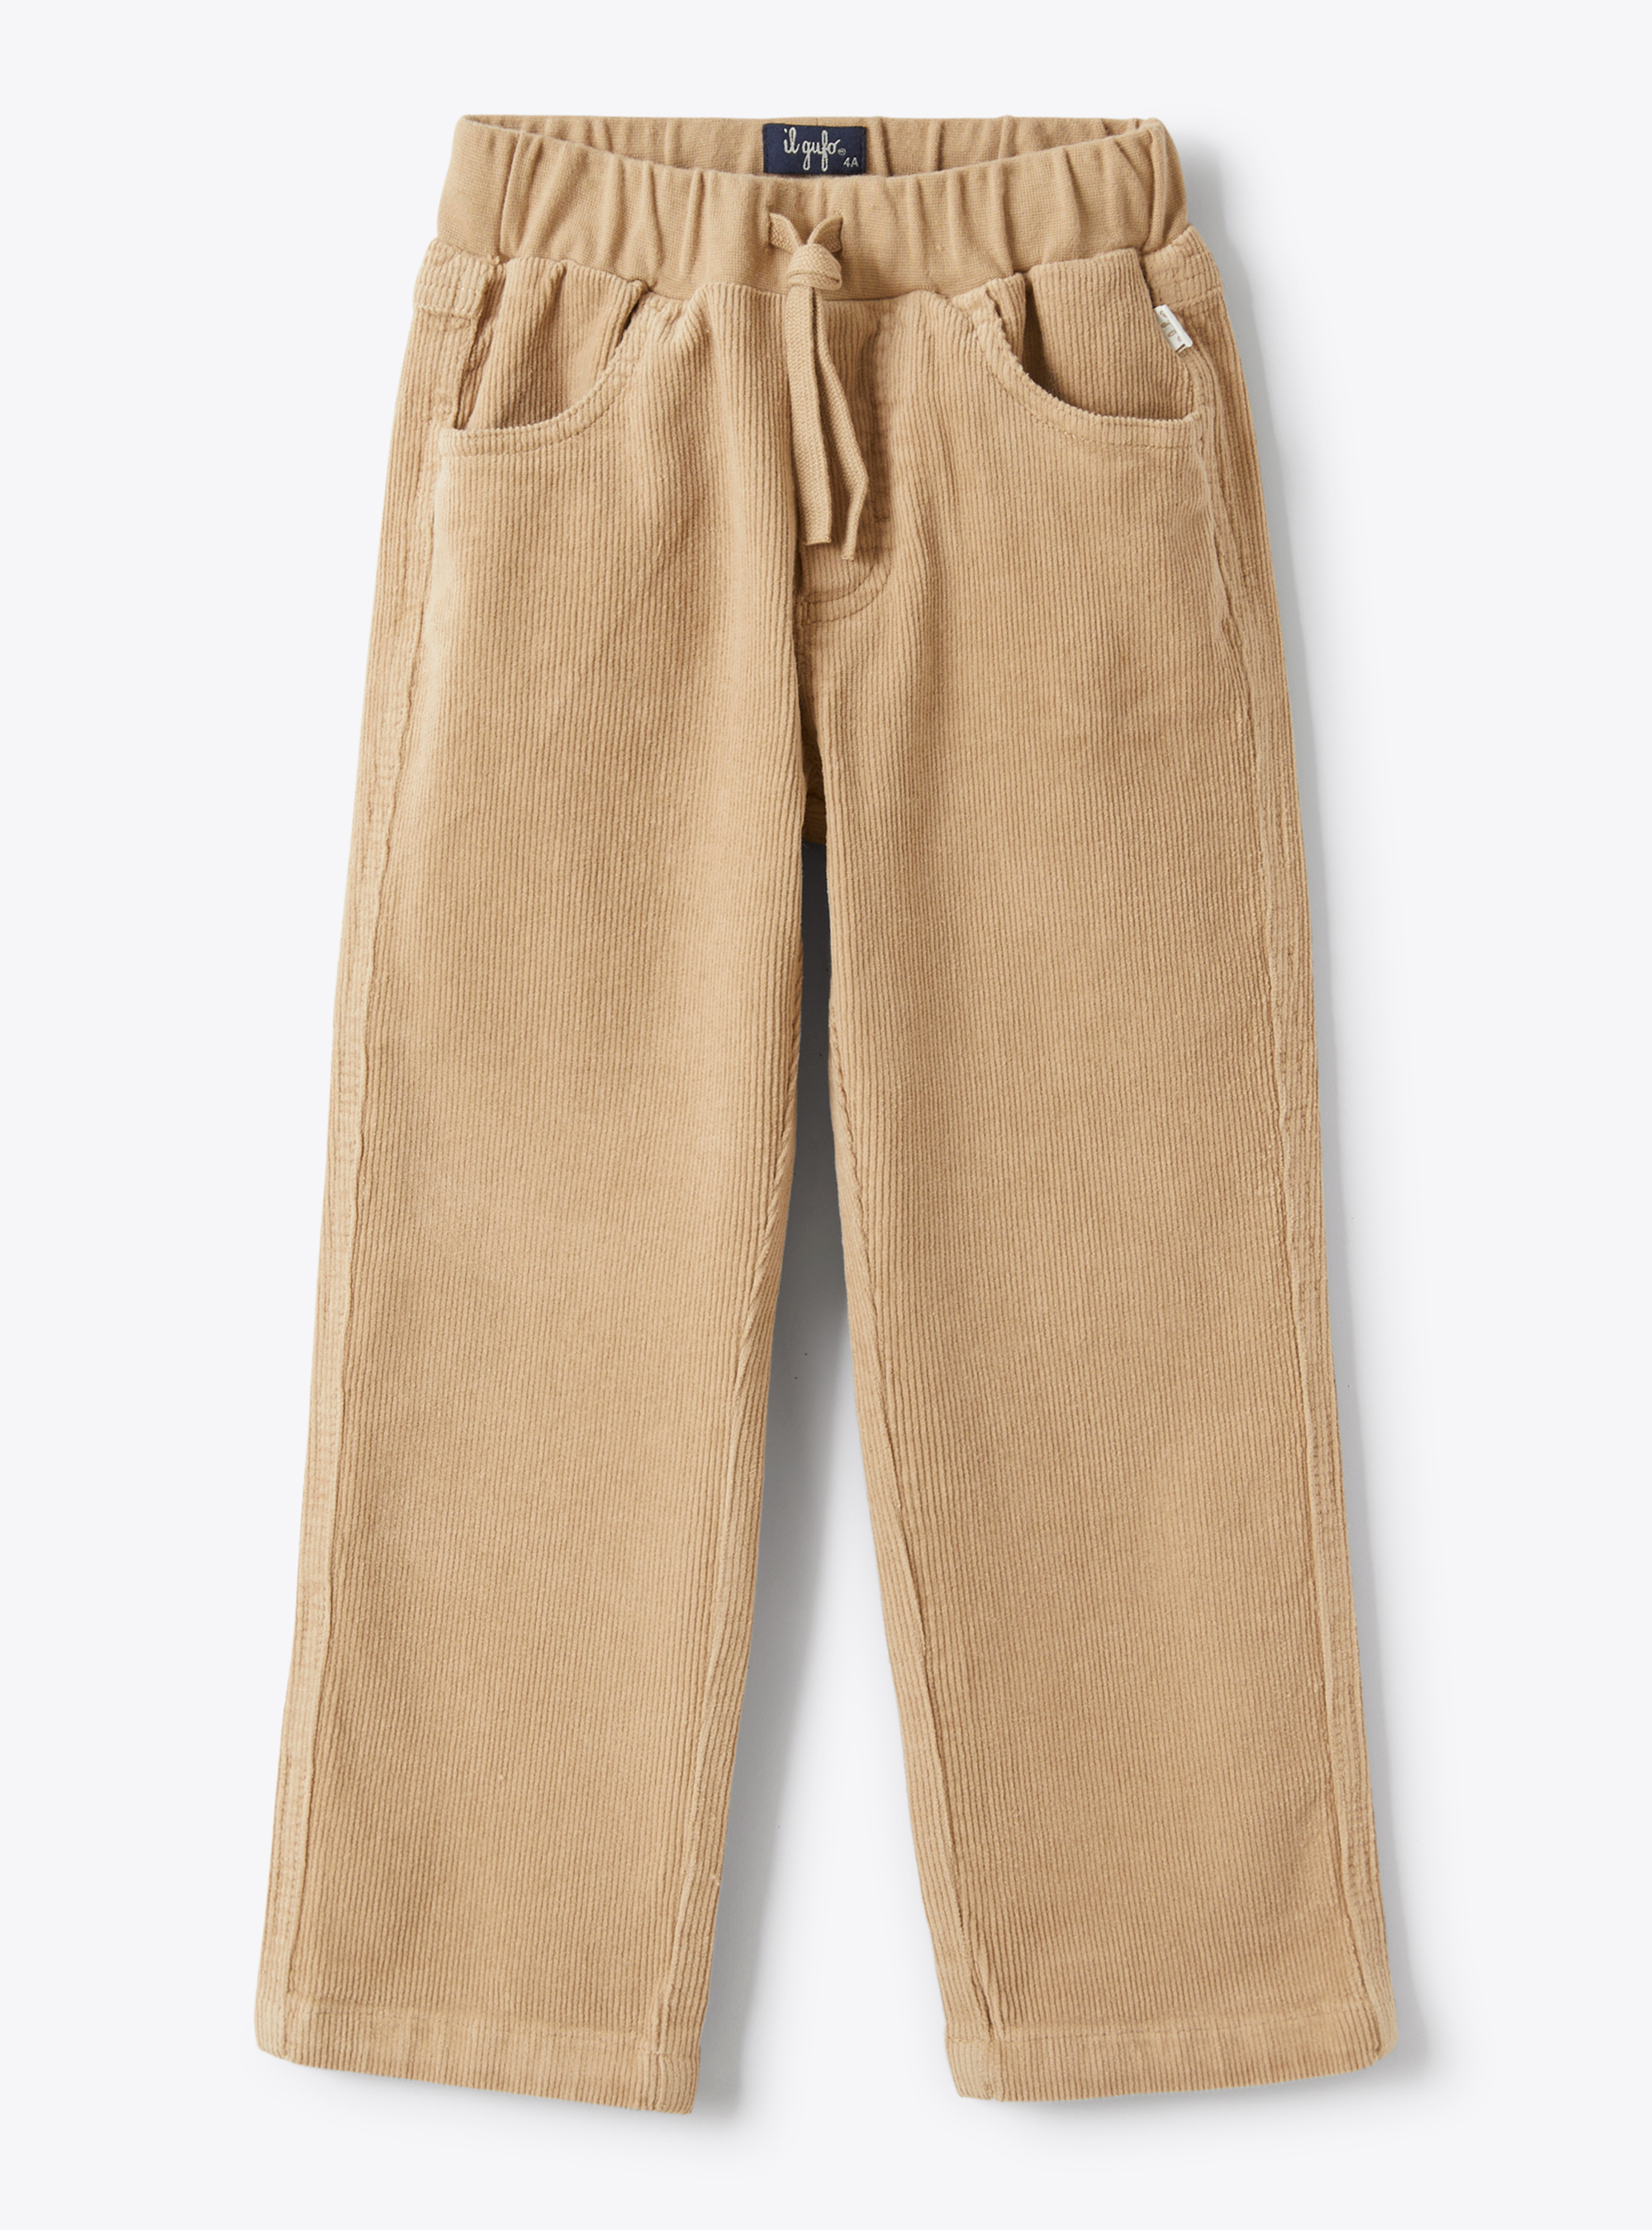 Light brown corduroy trousers - Trousers - Il Gufo